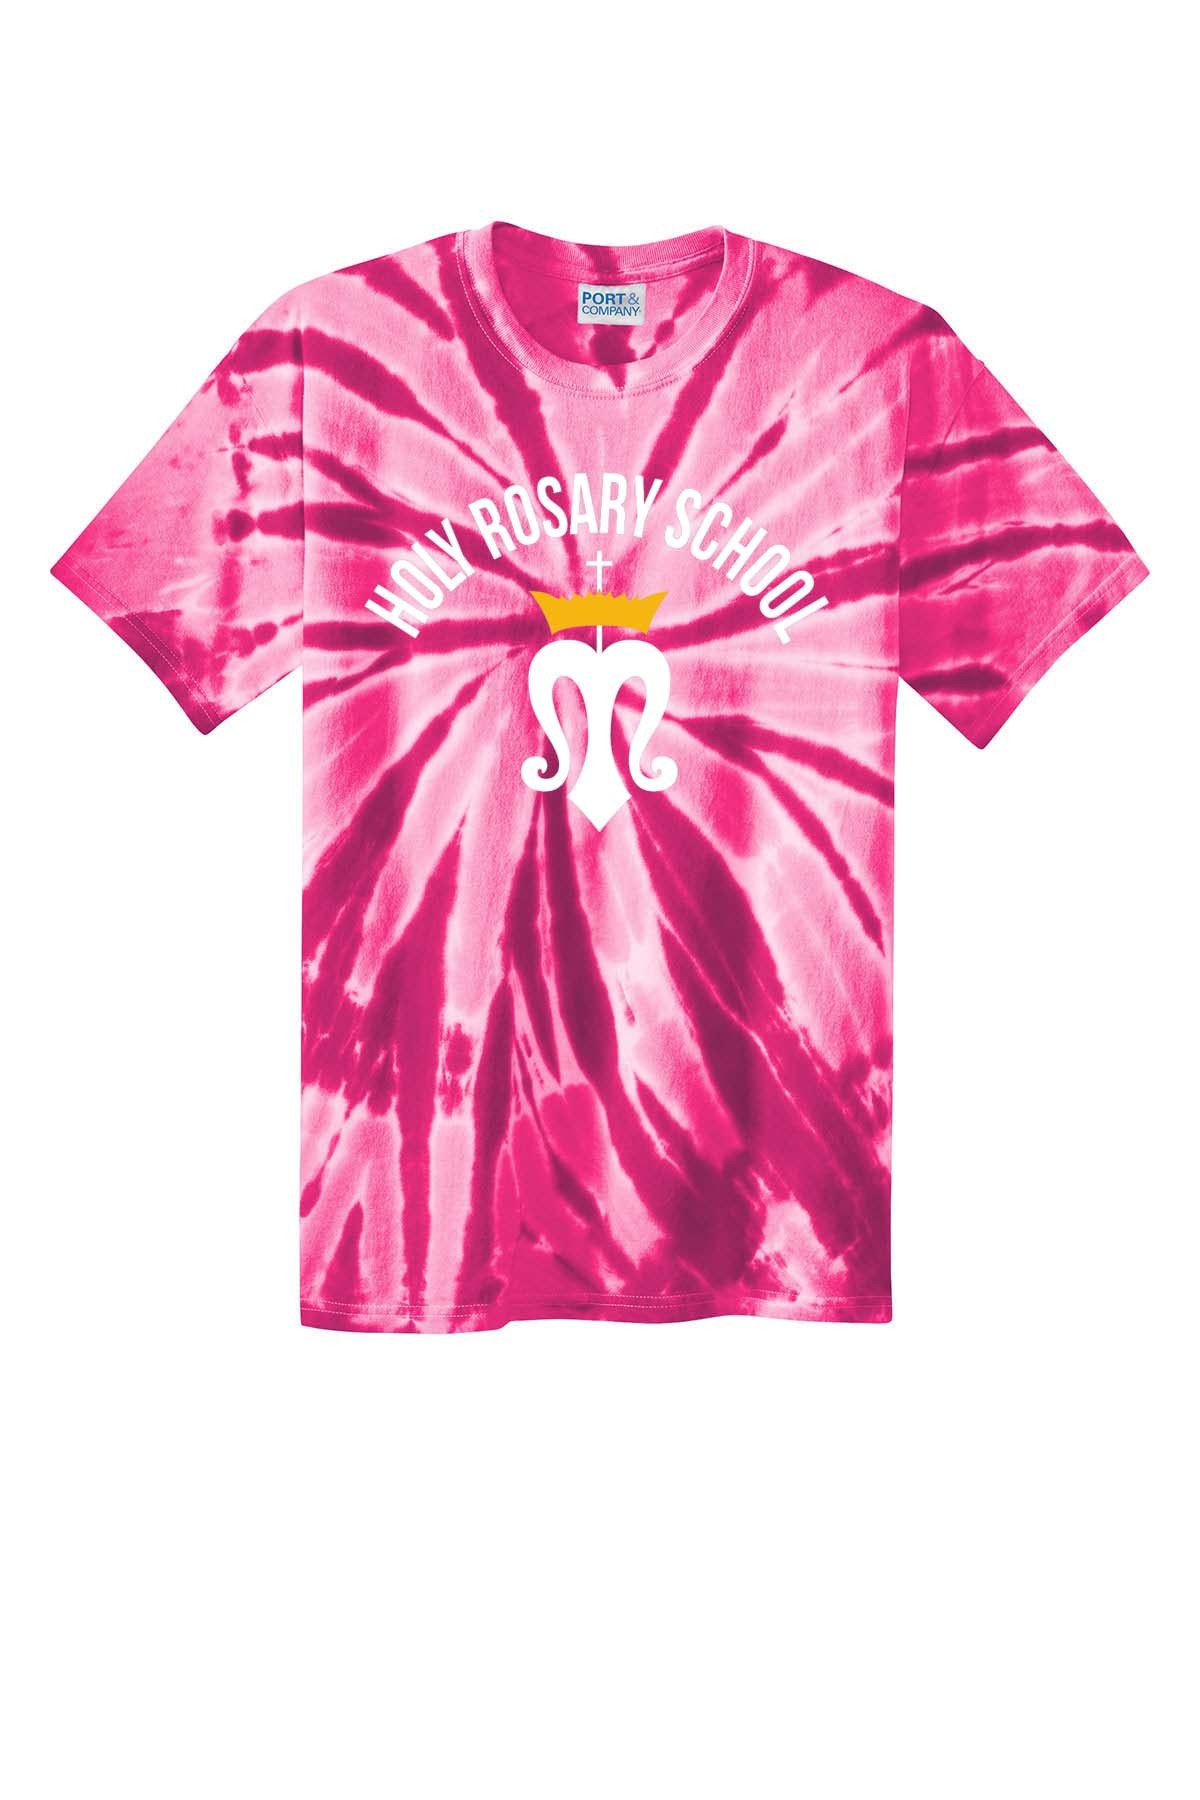 HRS Spirit S/S Tie Dye T-Shirt w/ White Logo - Please Allow 2-3 Weeks for Delivery